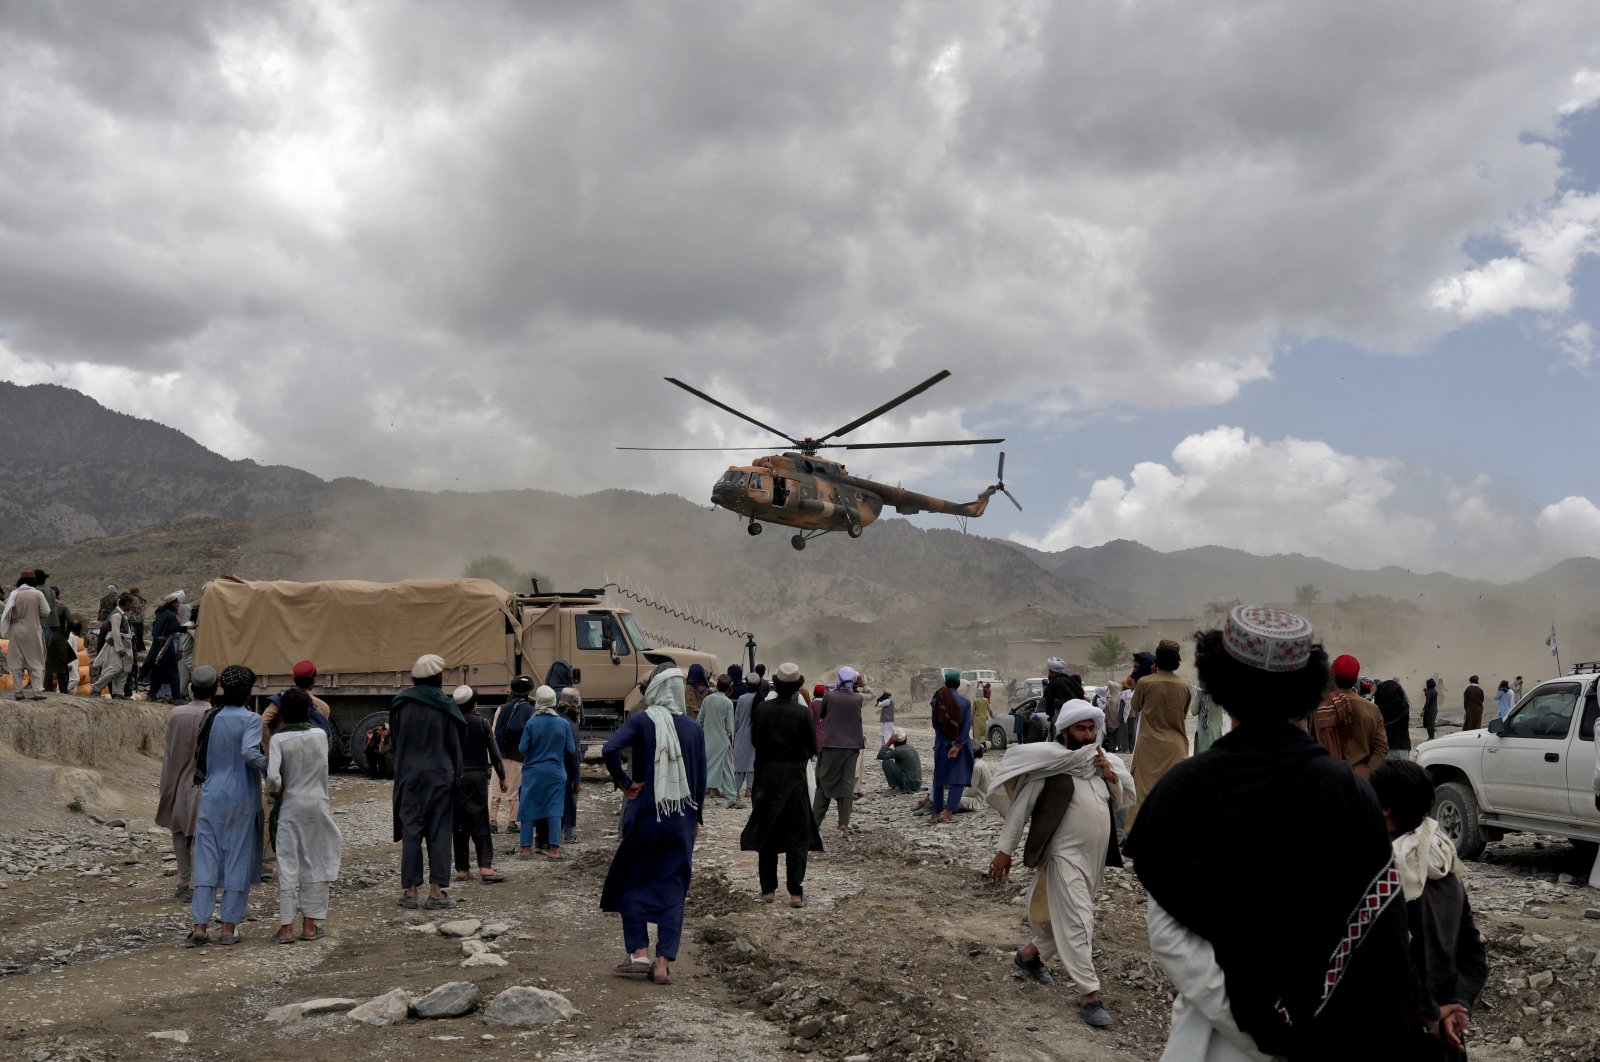 A Taliban helicopter carrying aid lands in an earthquake affected area in Gayan, Afghanistan, June 23, 2022. Picture taken June 23, 2022. (Reuters Photo)